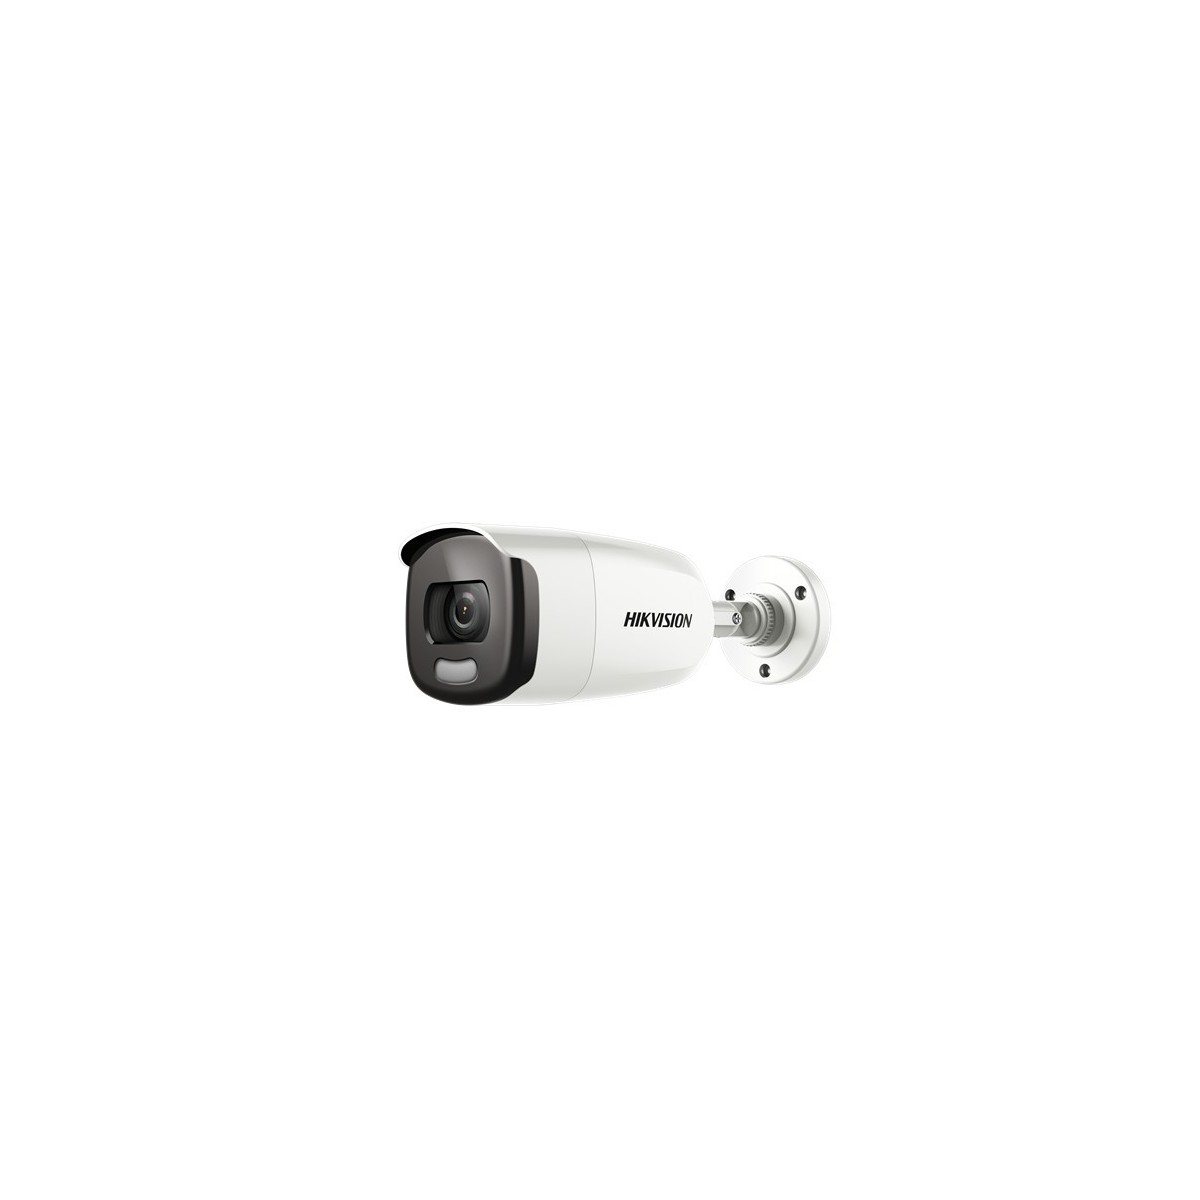 Hikvision Digital Technology DS-2CE12DFT-F28 - CCTV security camera - Indoor & outdoor - Wired - Bullet - Ceiling/Wall - White